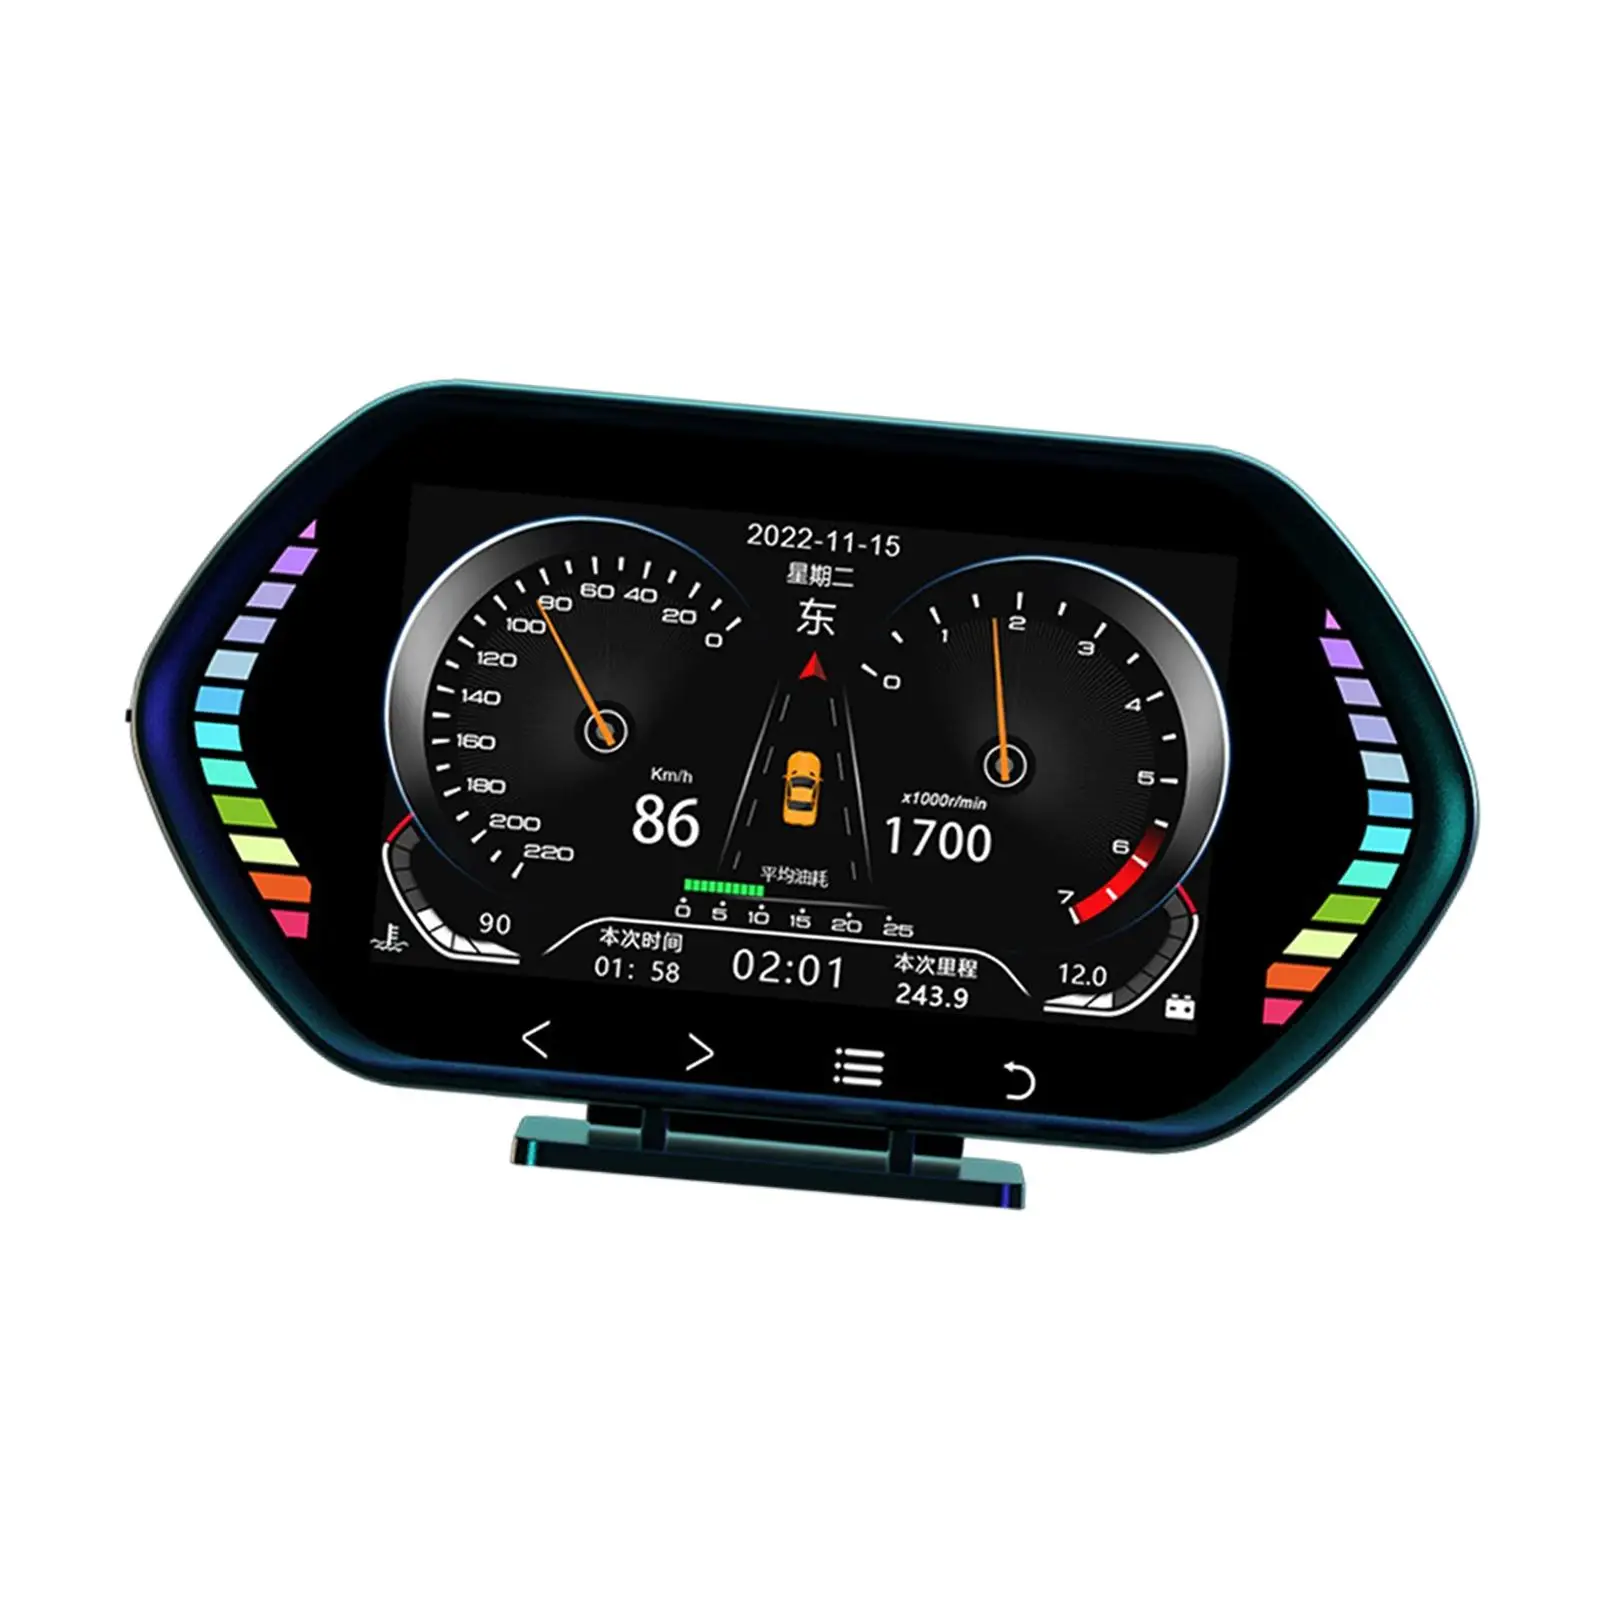 OBD2 Gauge Display 4.5inch OBD LCD Display with Ambient Light Digital Speedometer Head up Display for Most Vehicles Cars